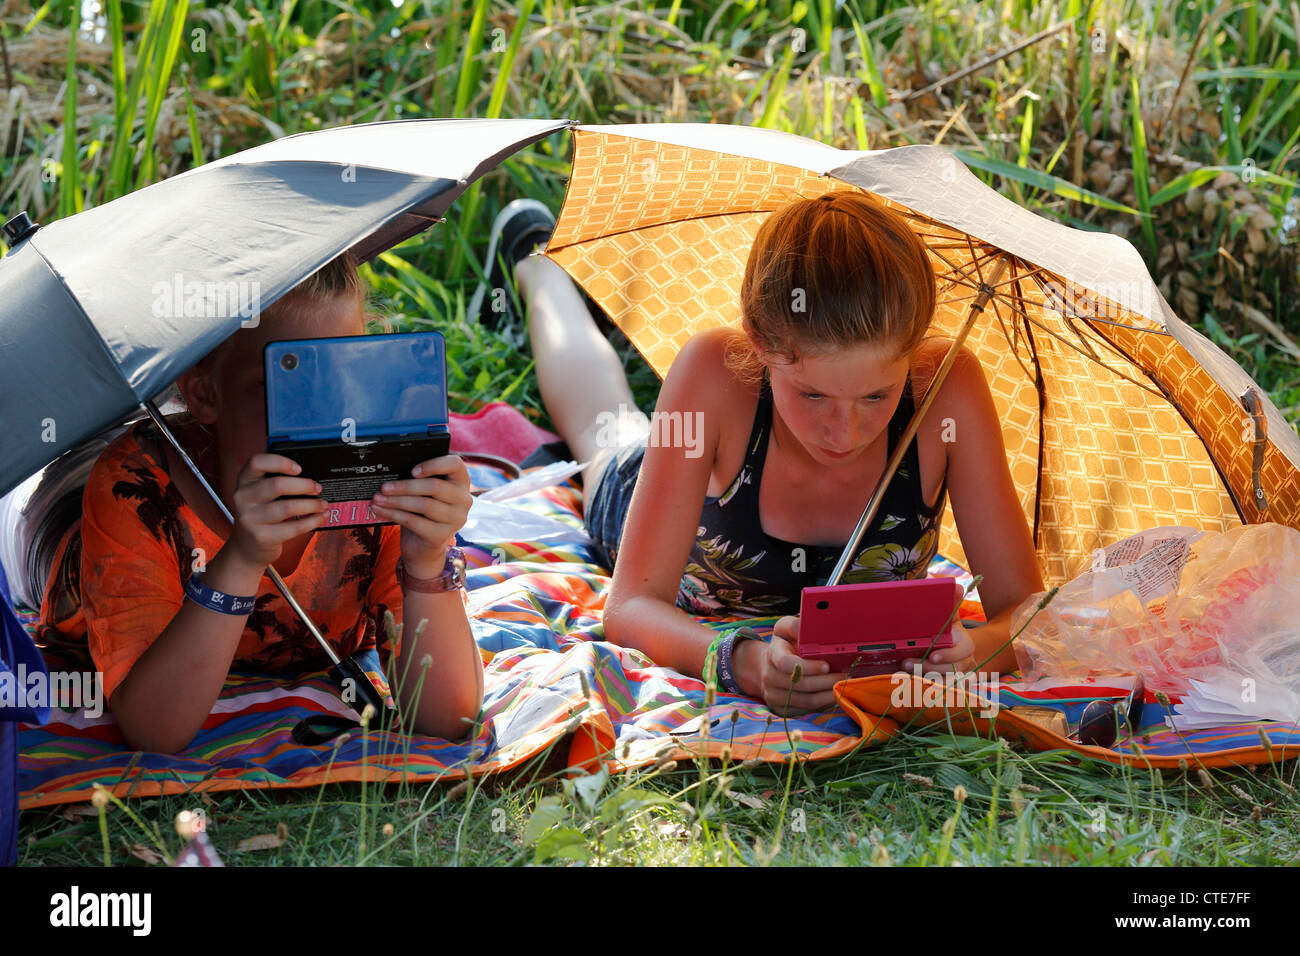 Girls playing portable video games under umbrellas in a city park, Boston, Massachusetts Stock Photo